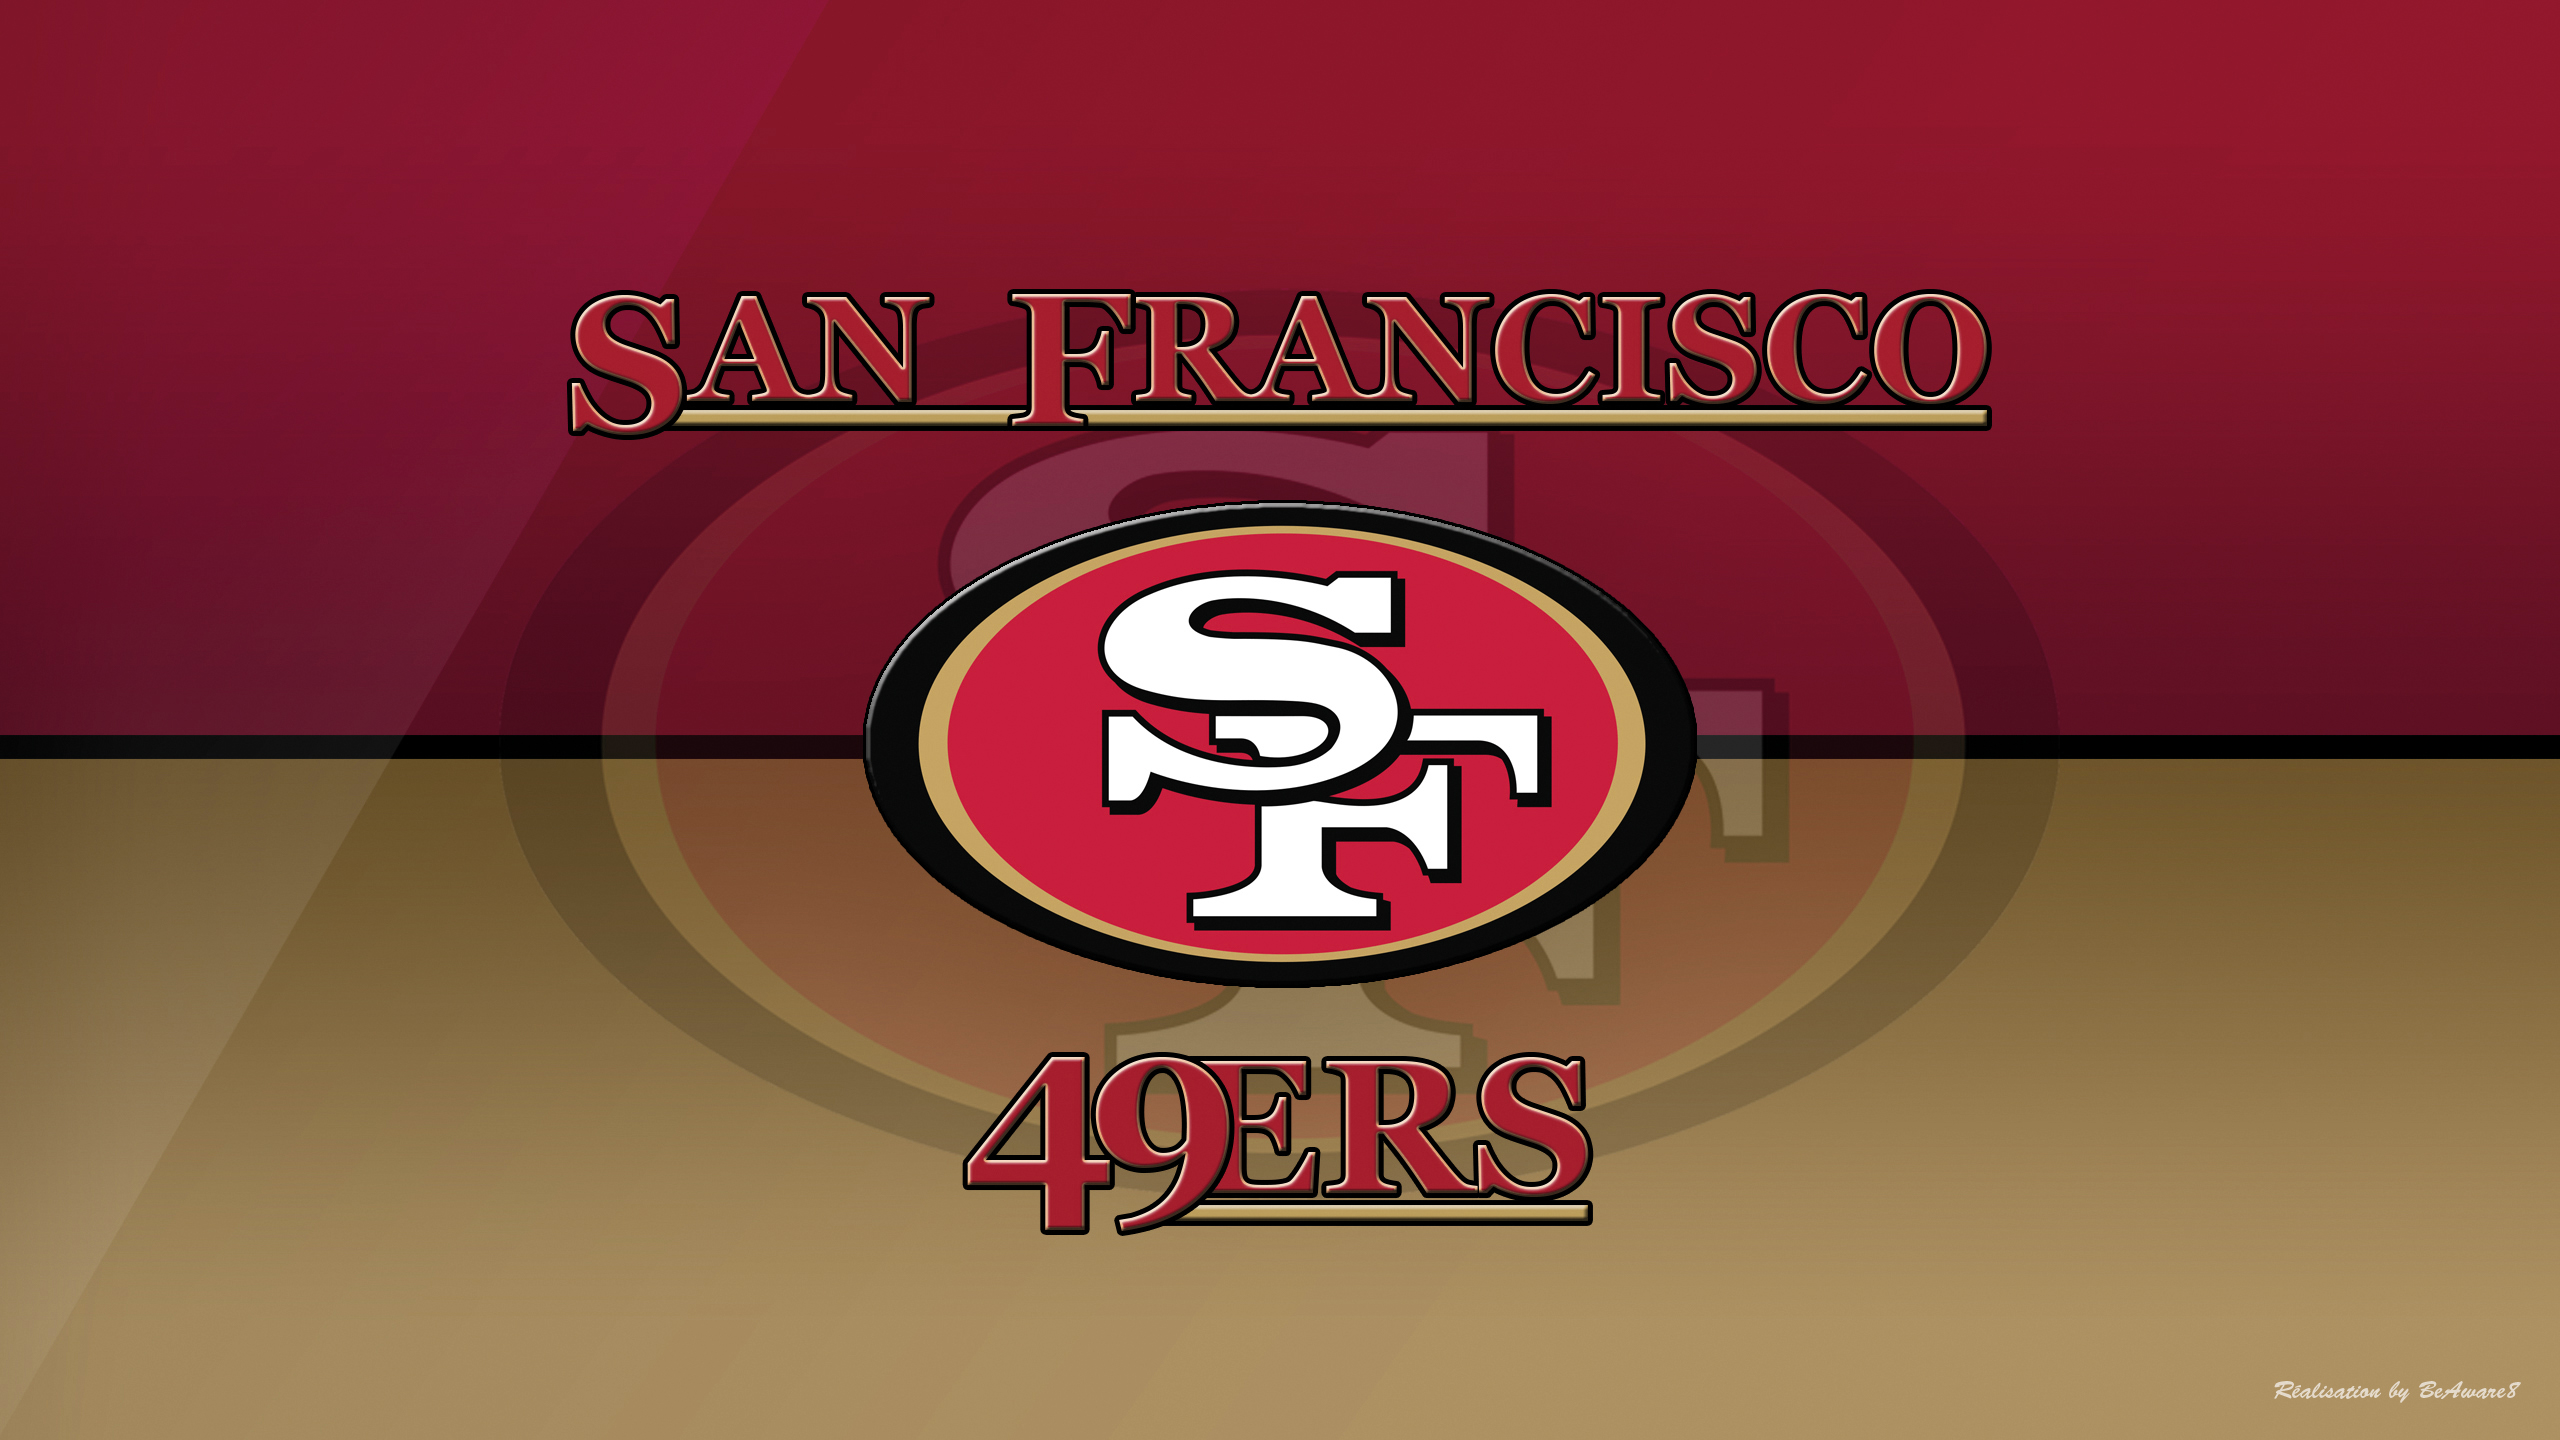 San Francisco 49ers by BeAware8 on